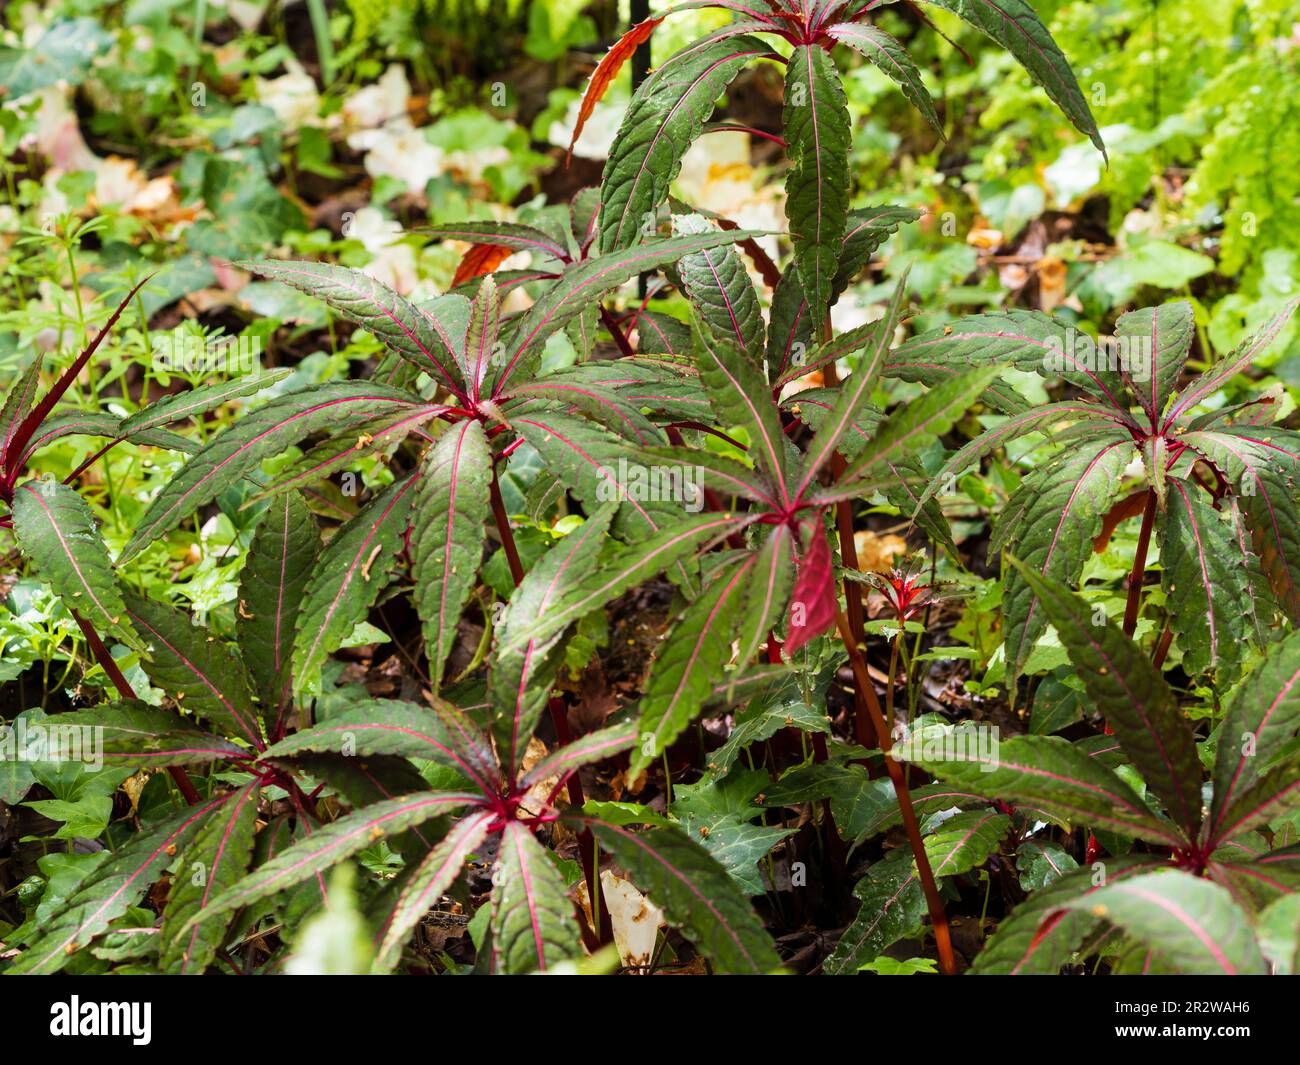 Red veined palmate foliage of the hardy perennial busy lizzie, Impatiens omeiana 'Pink Nerves' Stock Photo